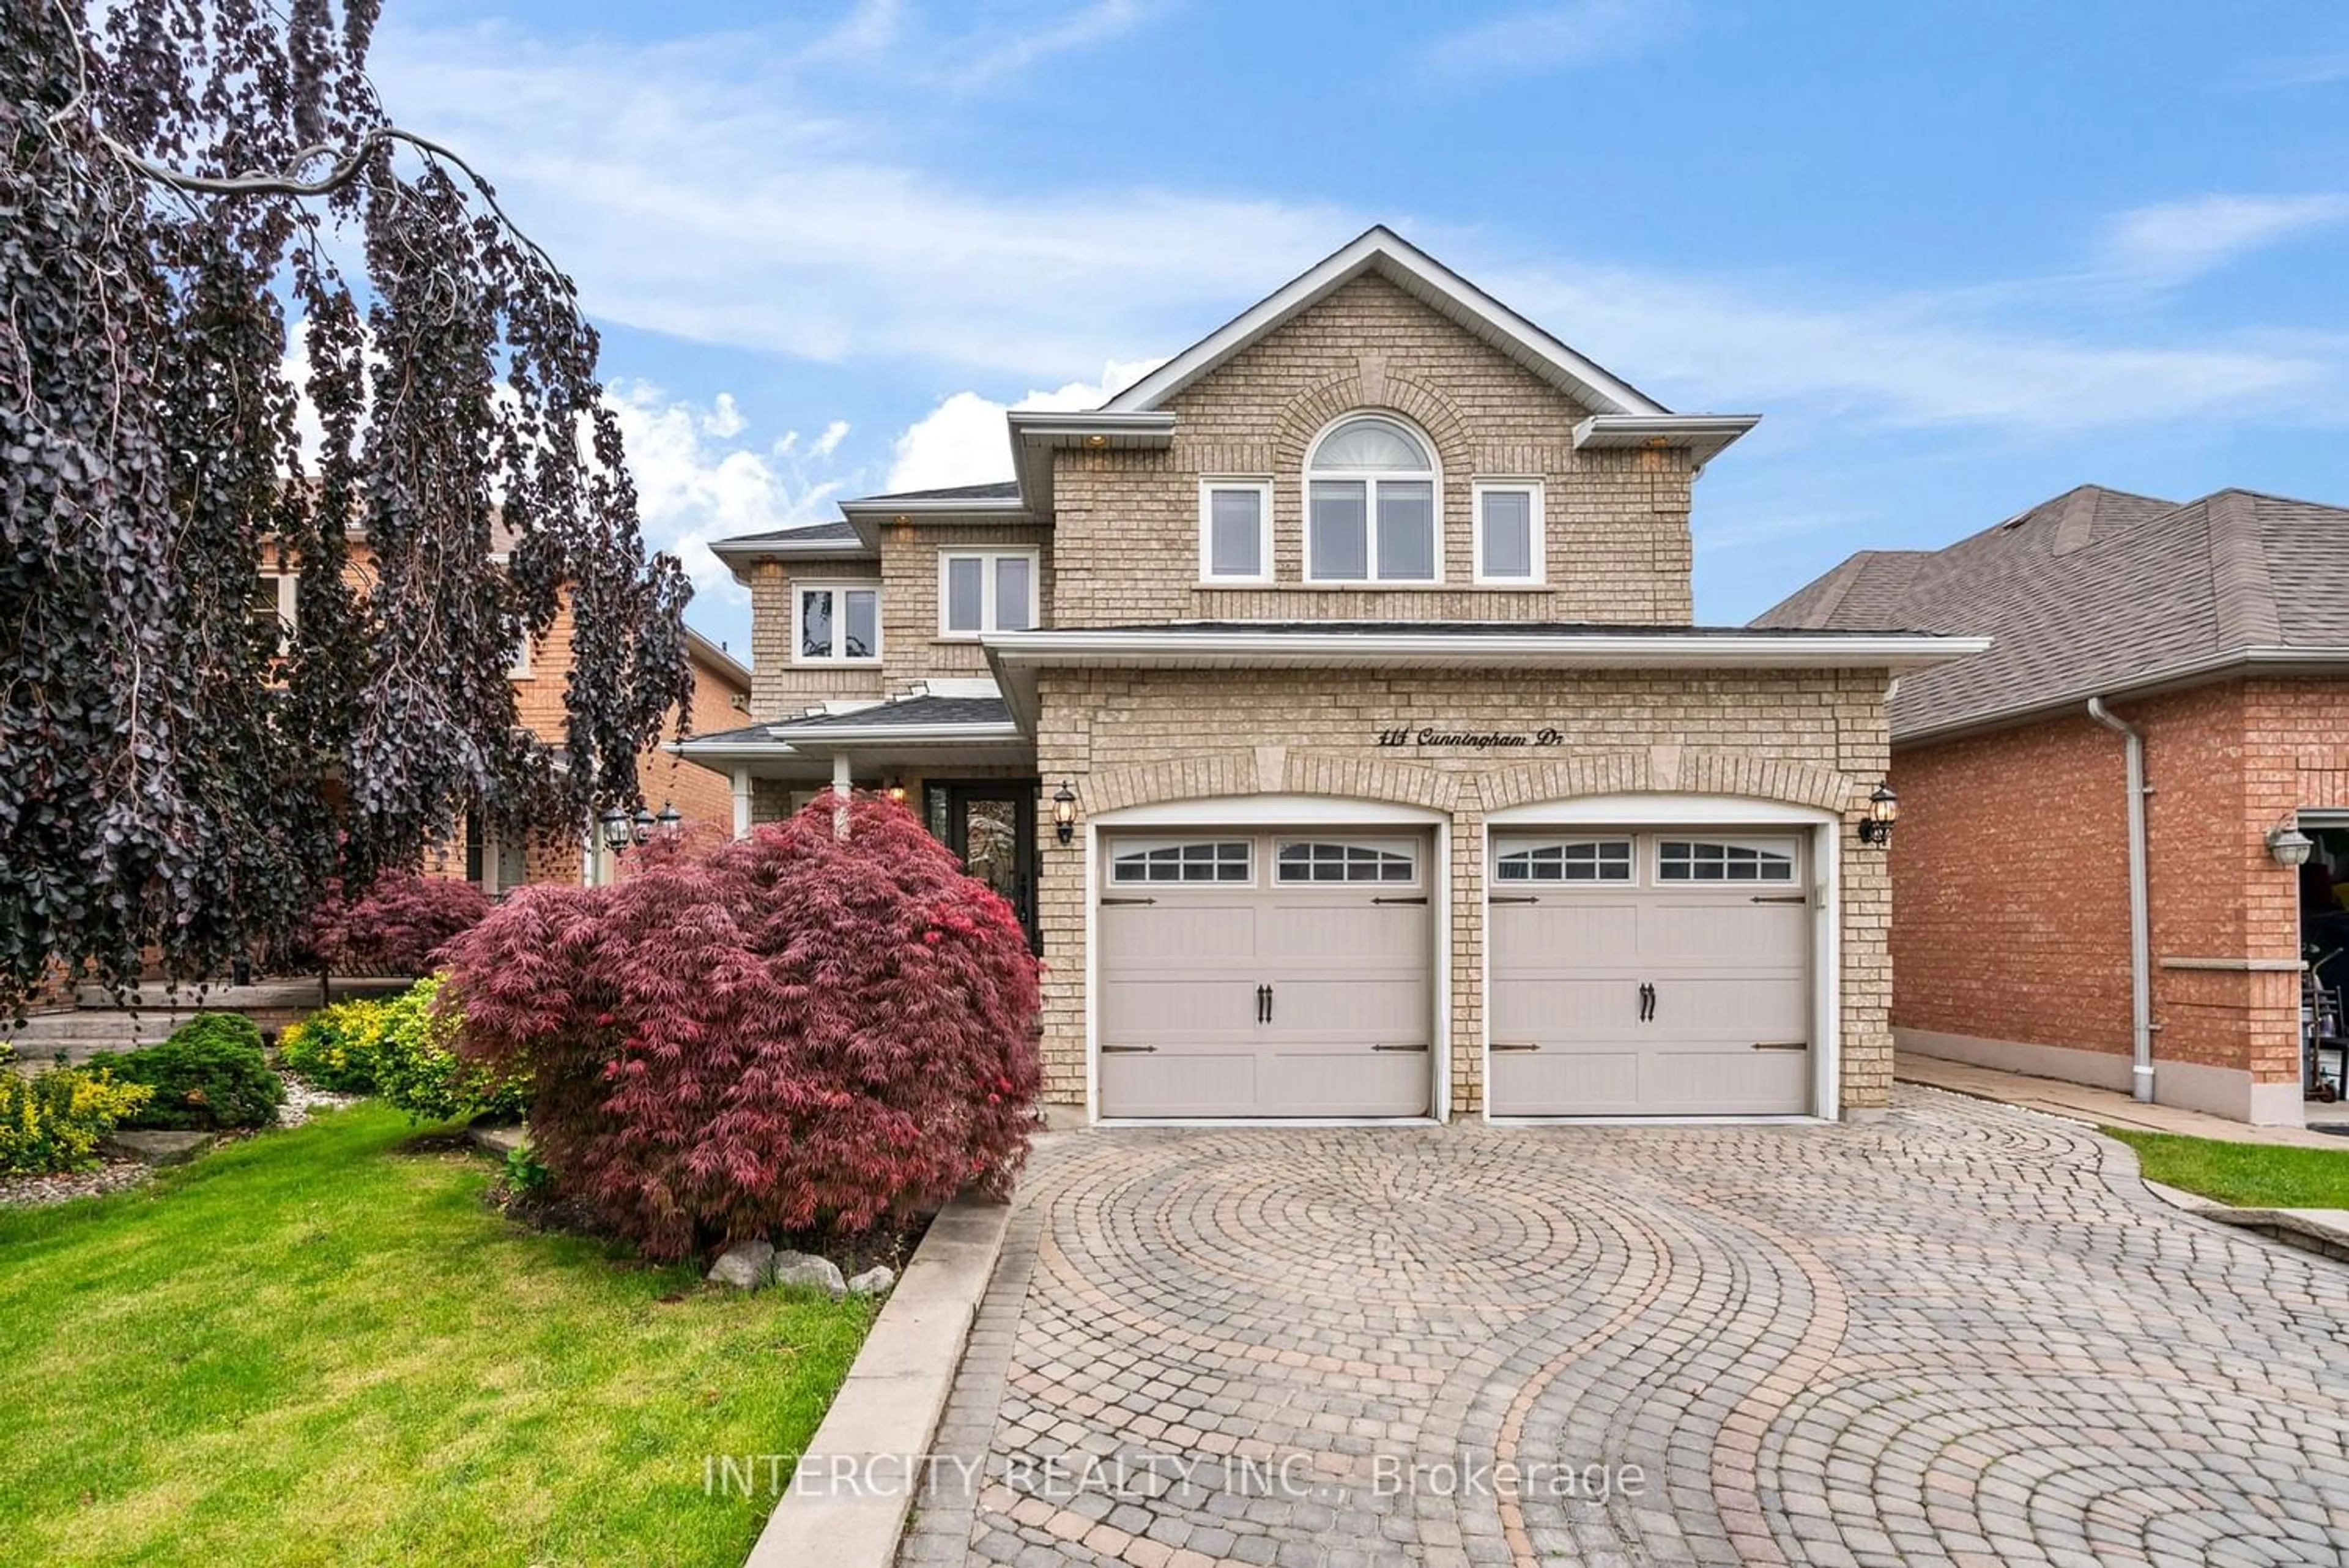 Home with brick exterior material for 414 Cunningham Dr, Vaughan Ontario L6A 2G6